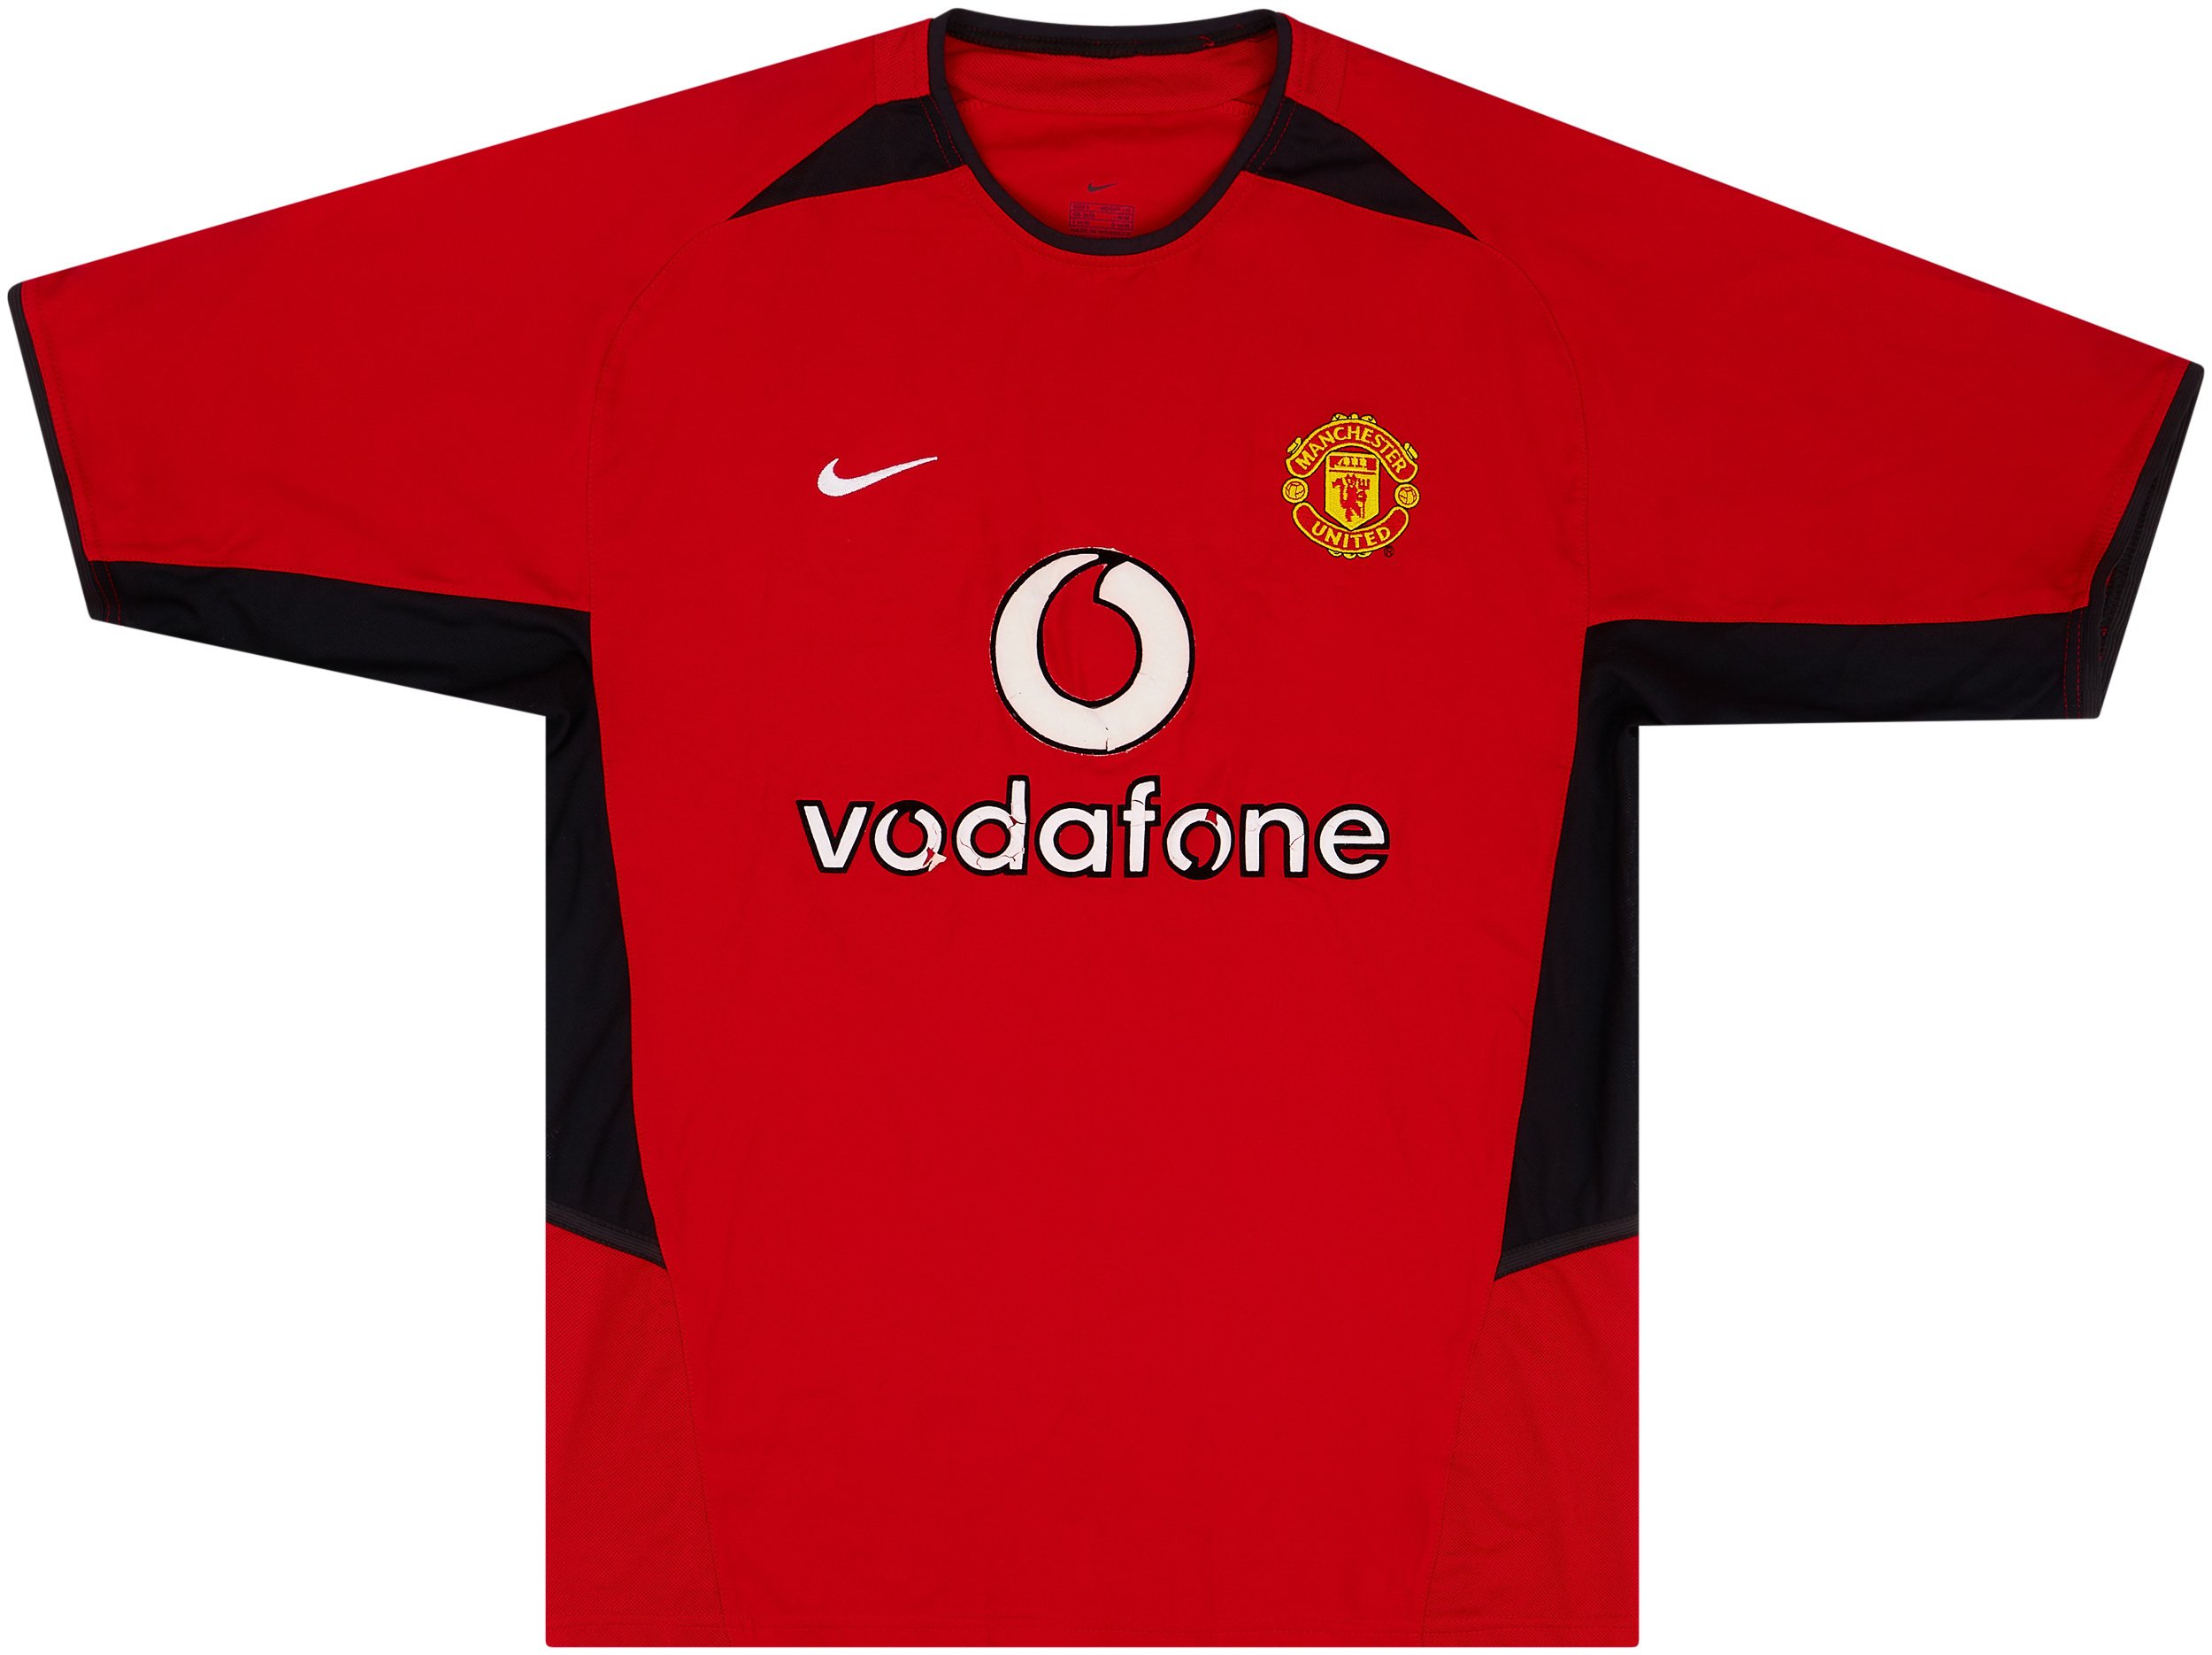 2002-04 Manchester United Home Shirt - 5/10 - ()